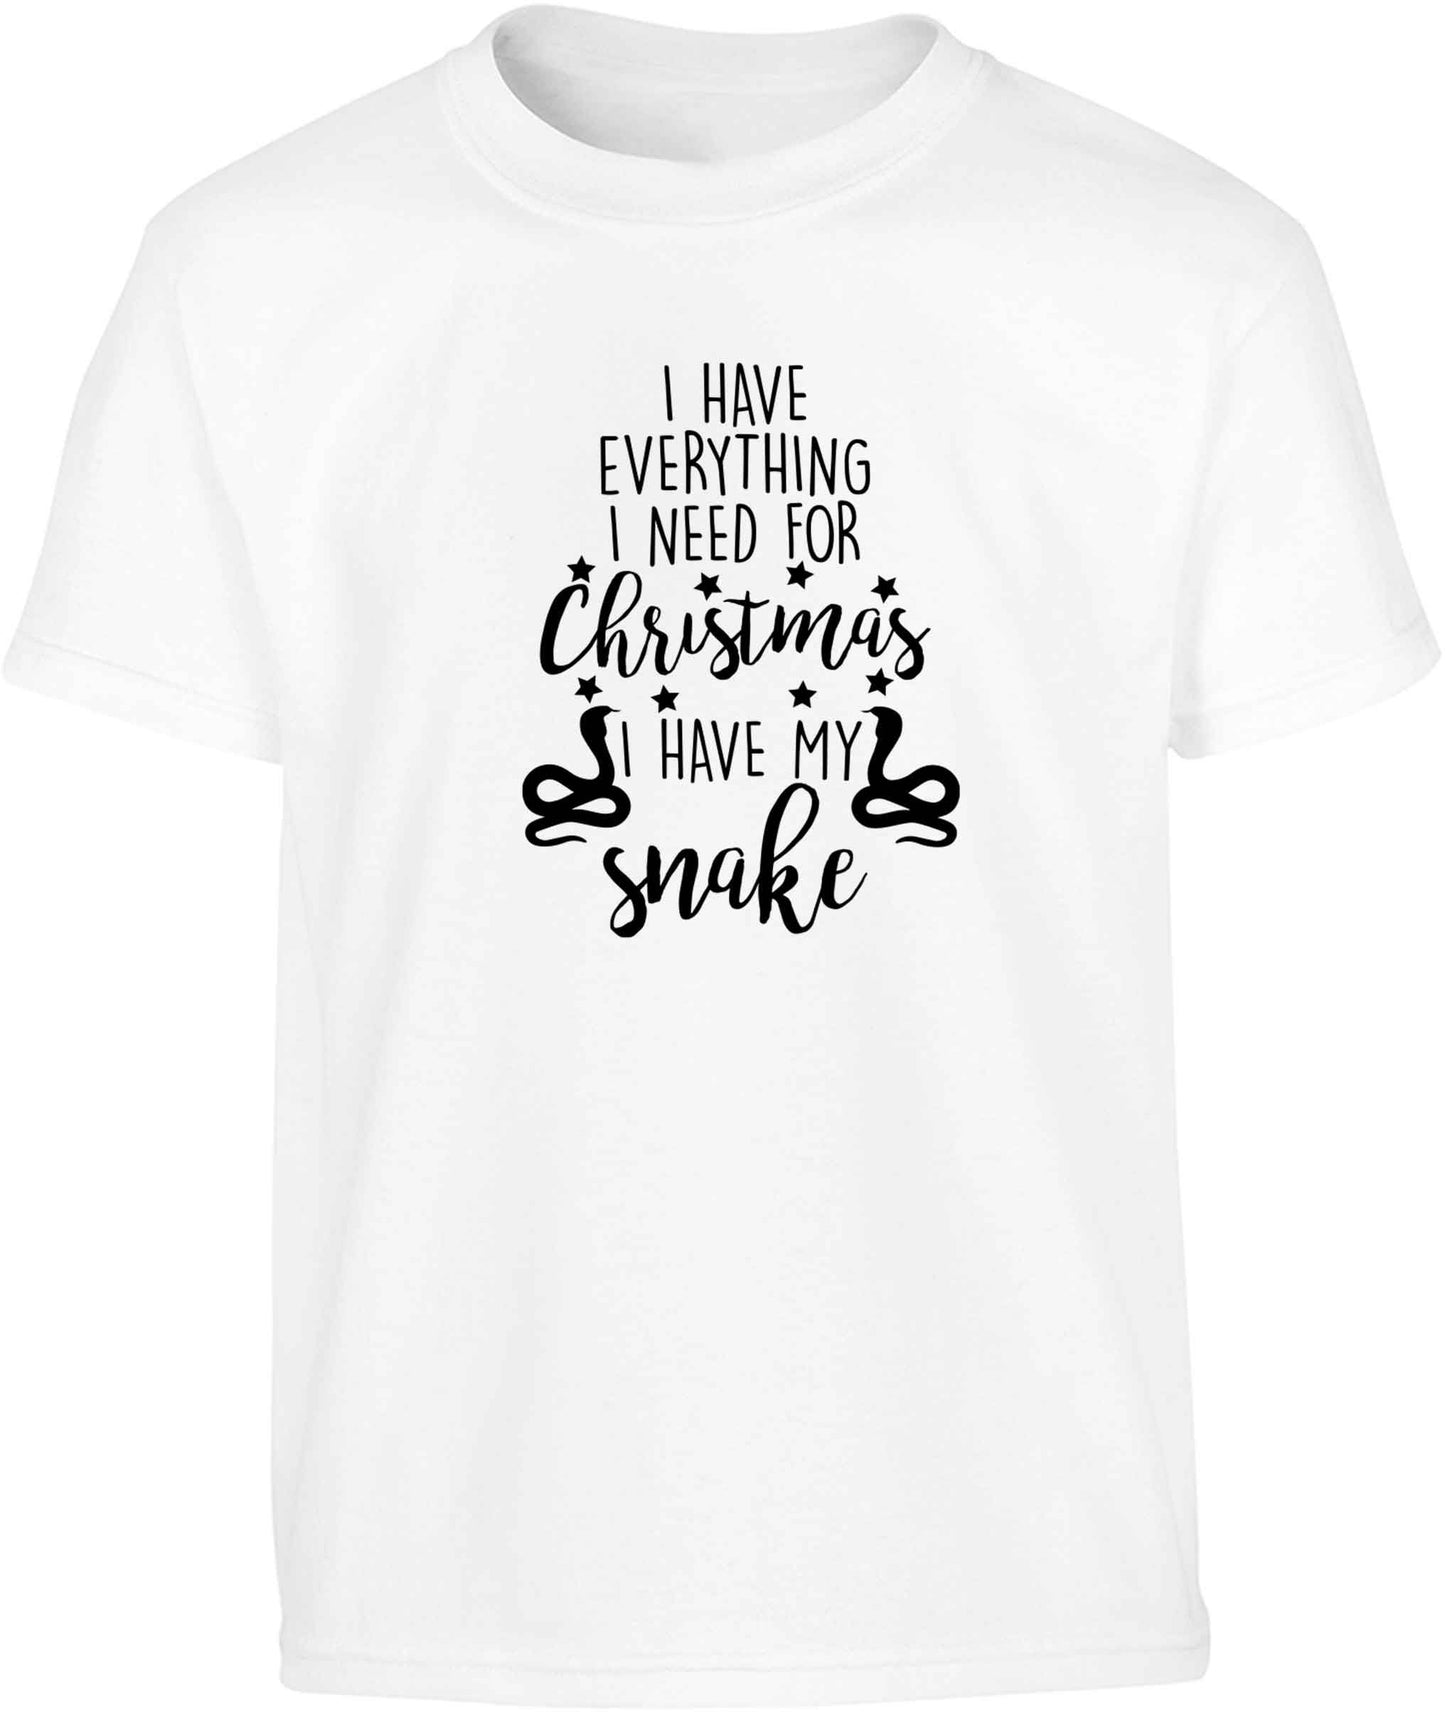 I have everything I need for Christmas I have my snake Children's white Tshirt 12-13 Years